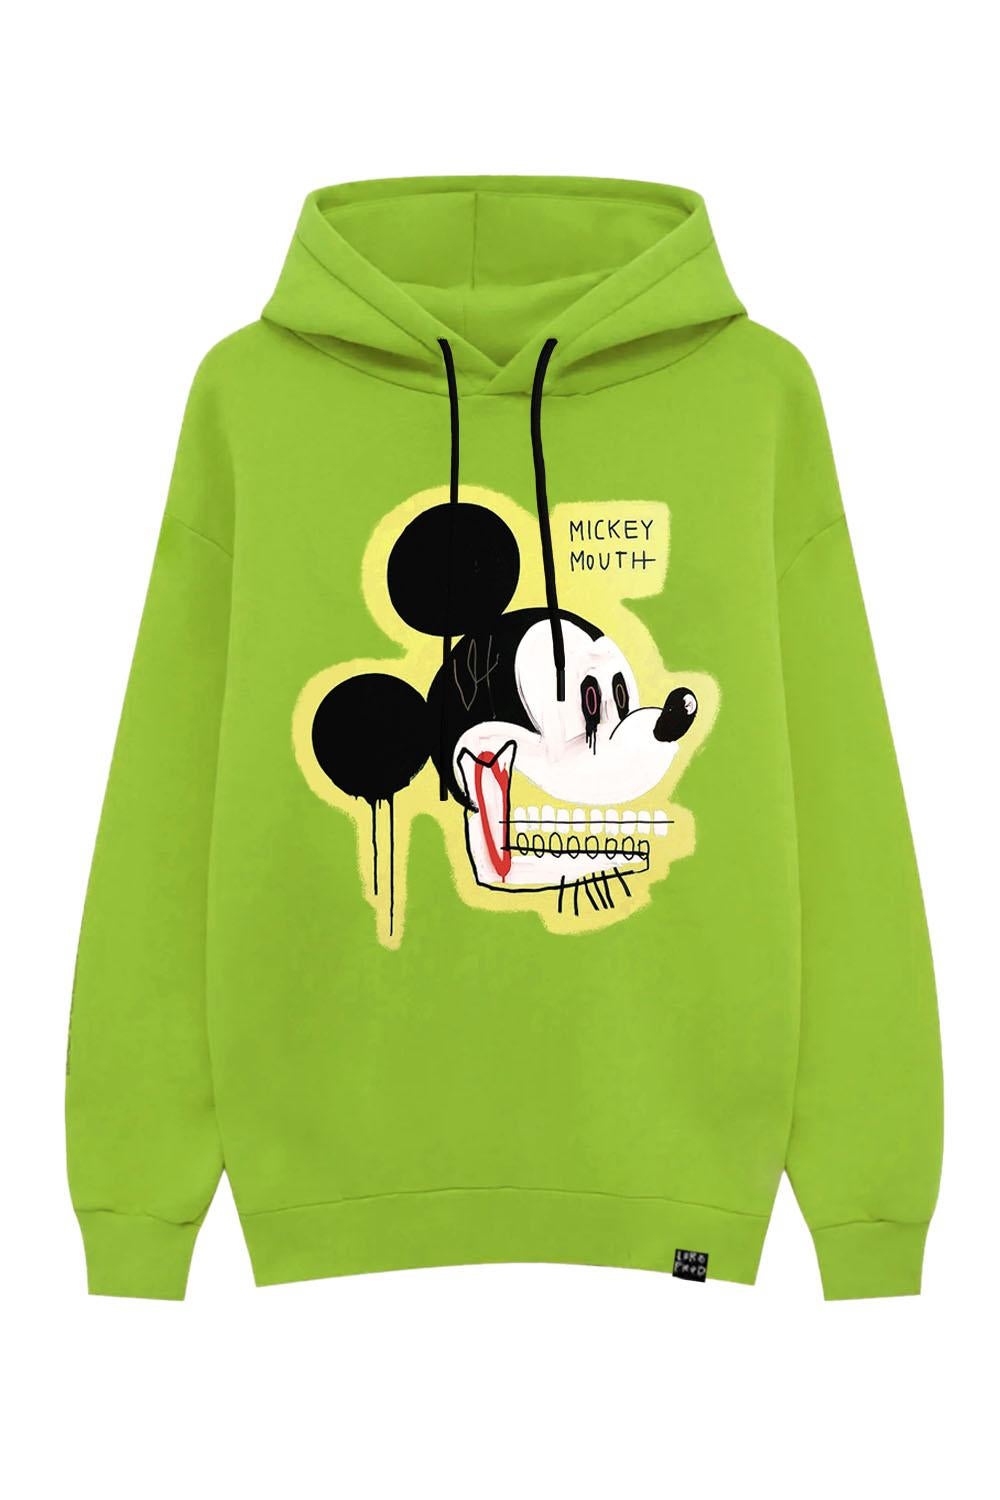 Women's or Men's Fluo Green cotton Mickey Mouth sweater